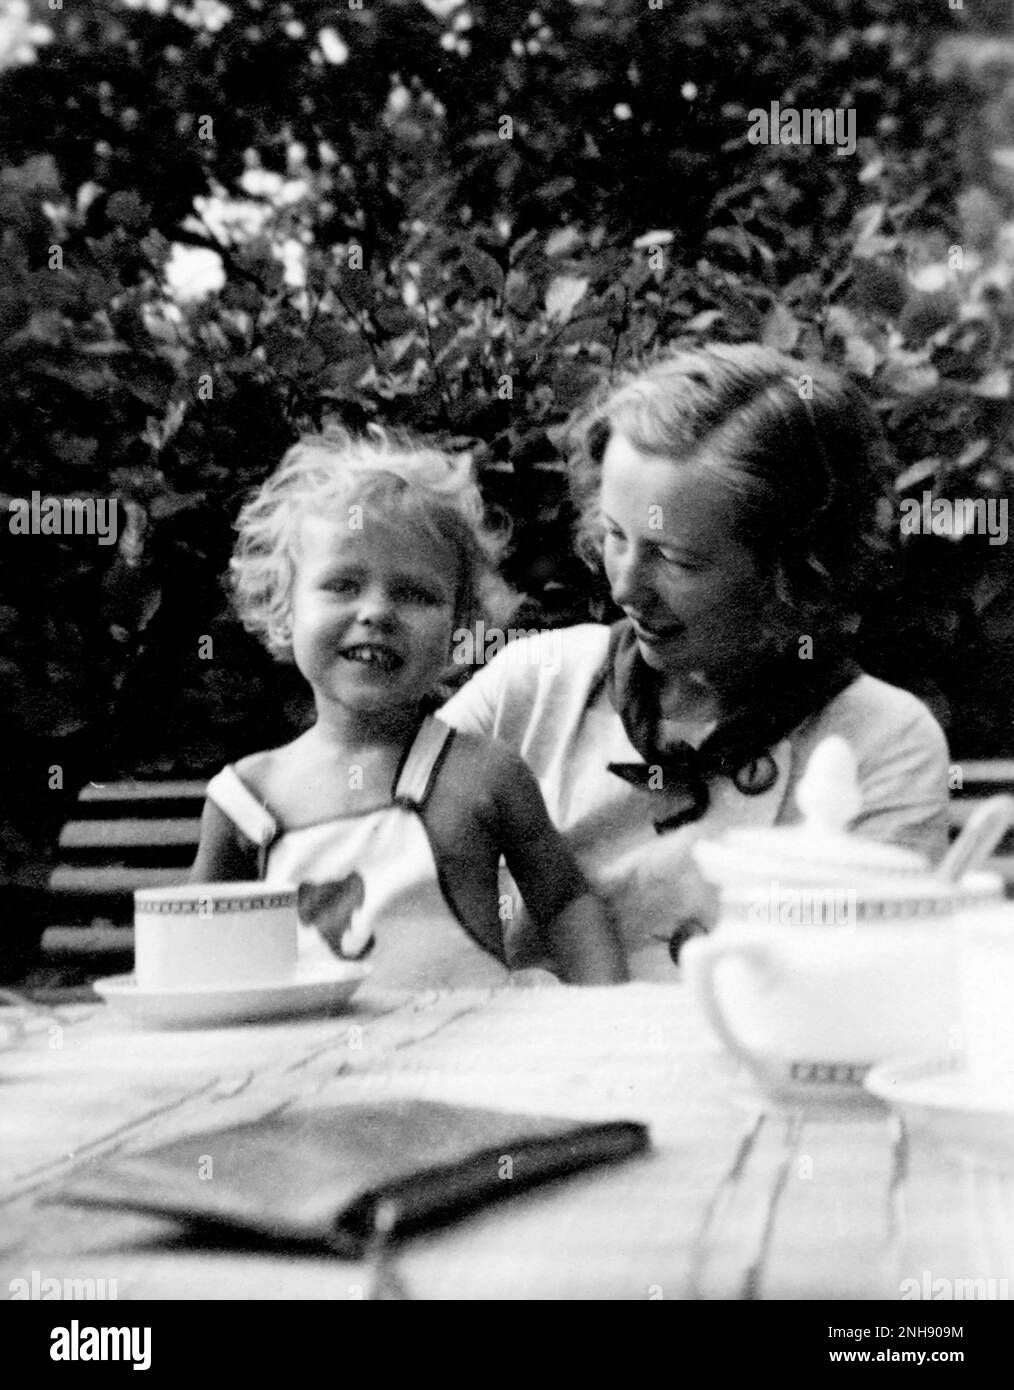 Maria Goeppert-Mayer (1906-1972) with daughter Marianne, summer 1935. Mayer was a German-born American theoretical physicist and Nobel laureate in Physics for proposing the nuclear shell model of the atomic nucleus. She was the second woman to win a Nobel Prize in physics, after Marie Curie. Stock Photo